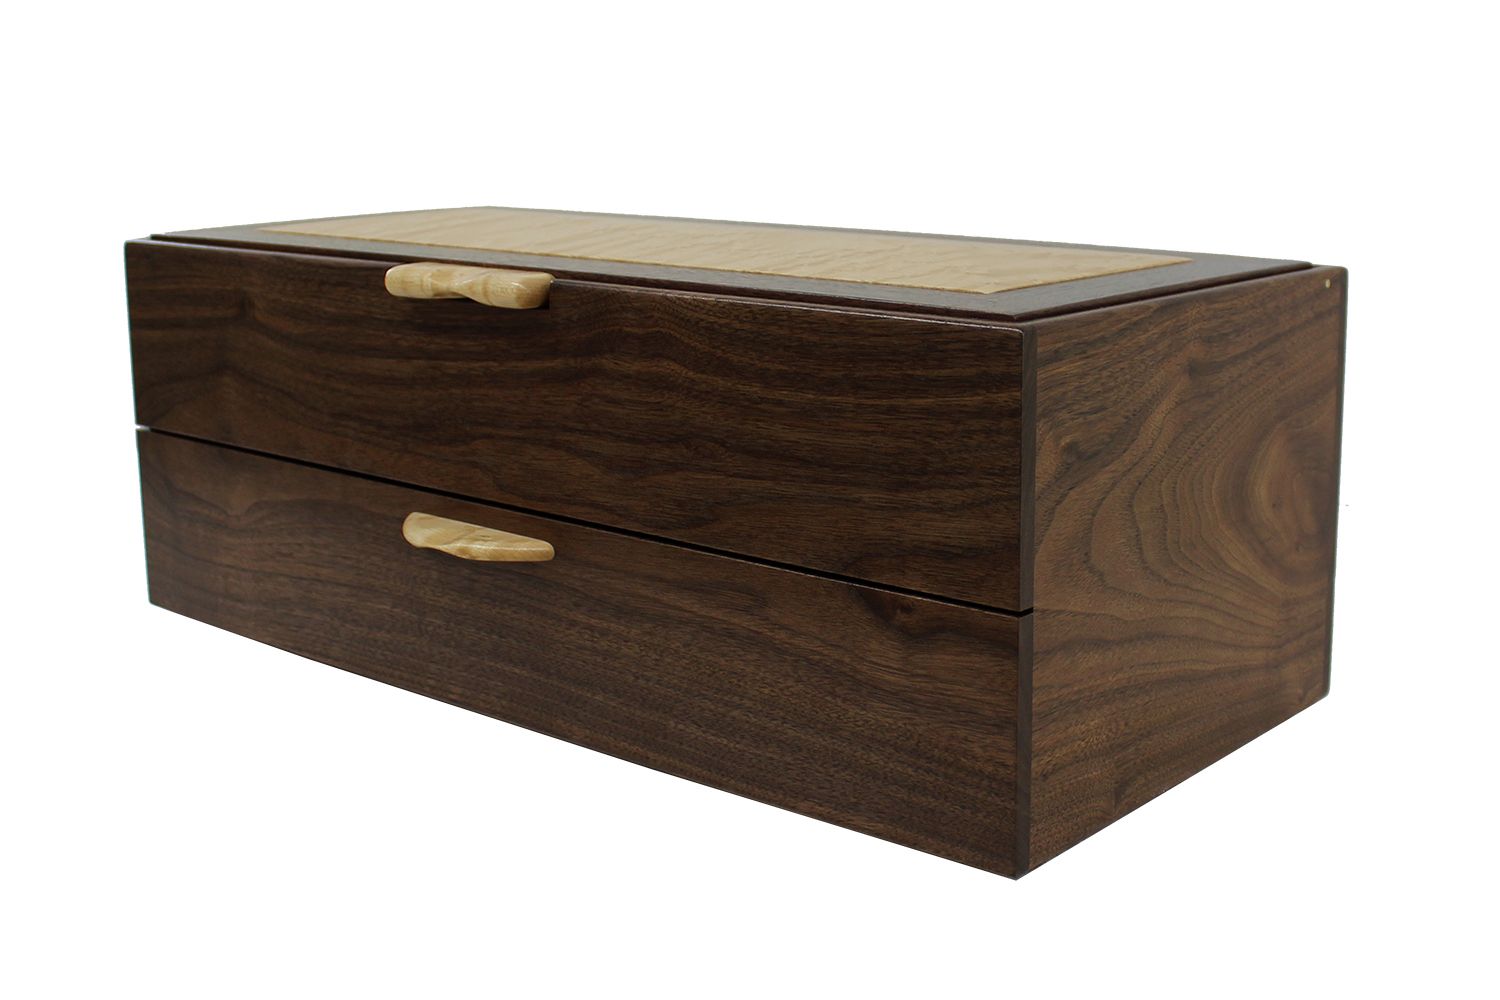 Buy Hand Crafted 20 Watch Box With Sliding Drawer | Solid Walnut And ...